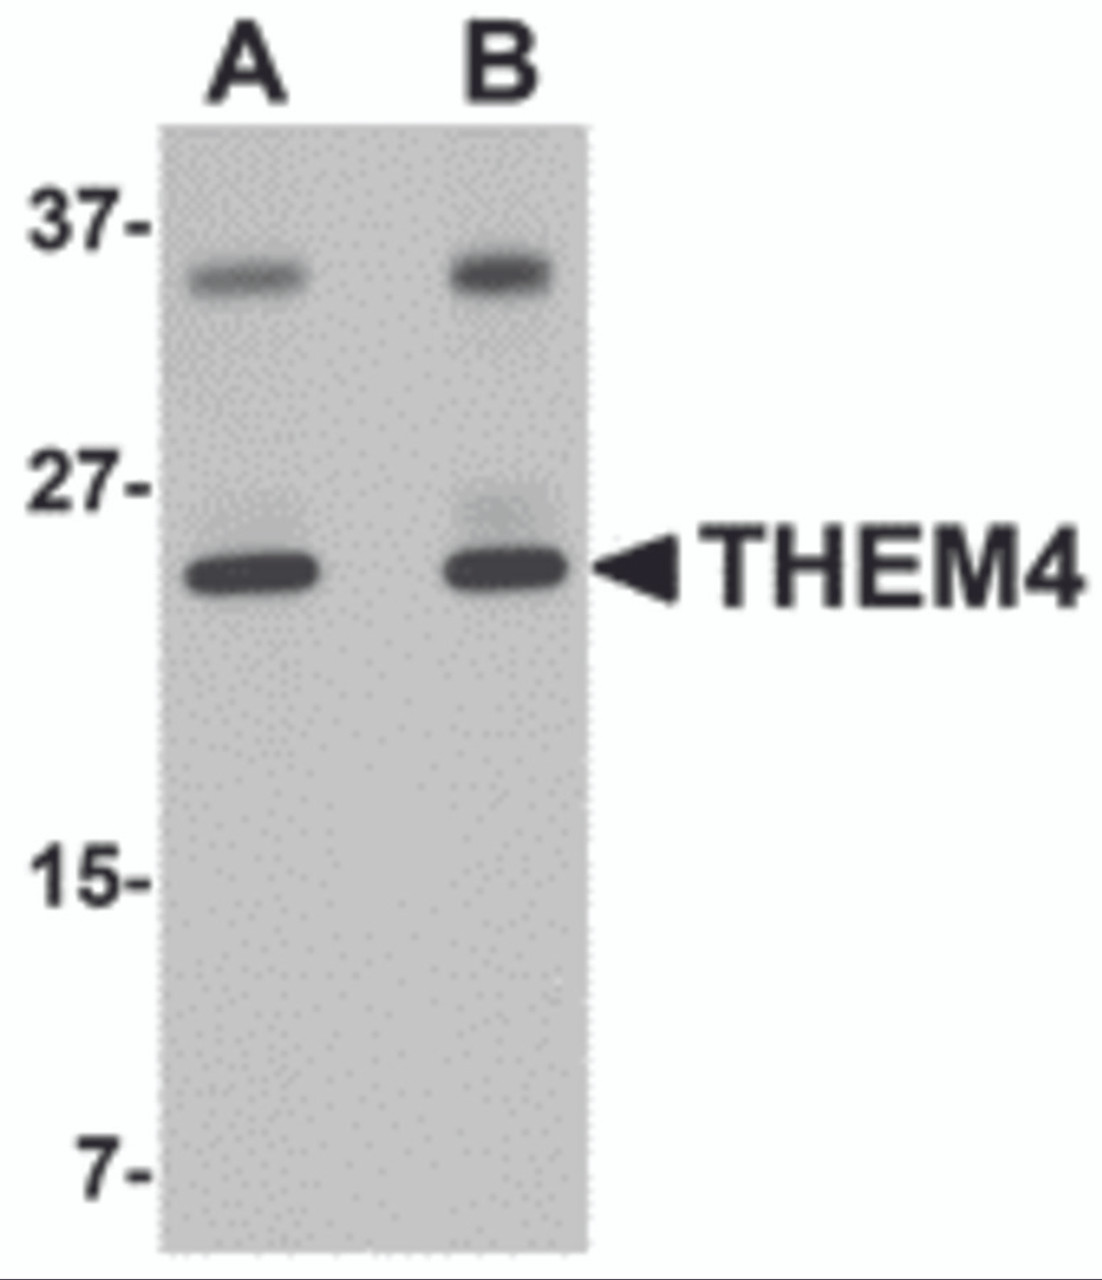 Western blot analysis of THEM4 in human liver tissue lysate with THEM4 antibody at (A) 1 and (B) 2 &#956;g/mL.